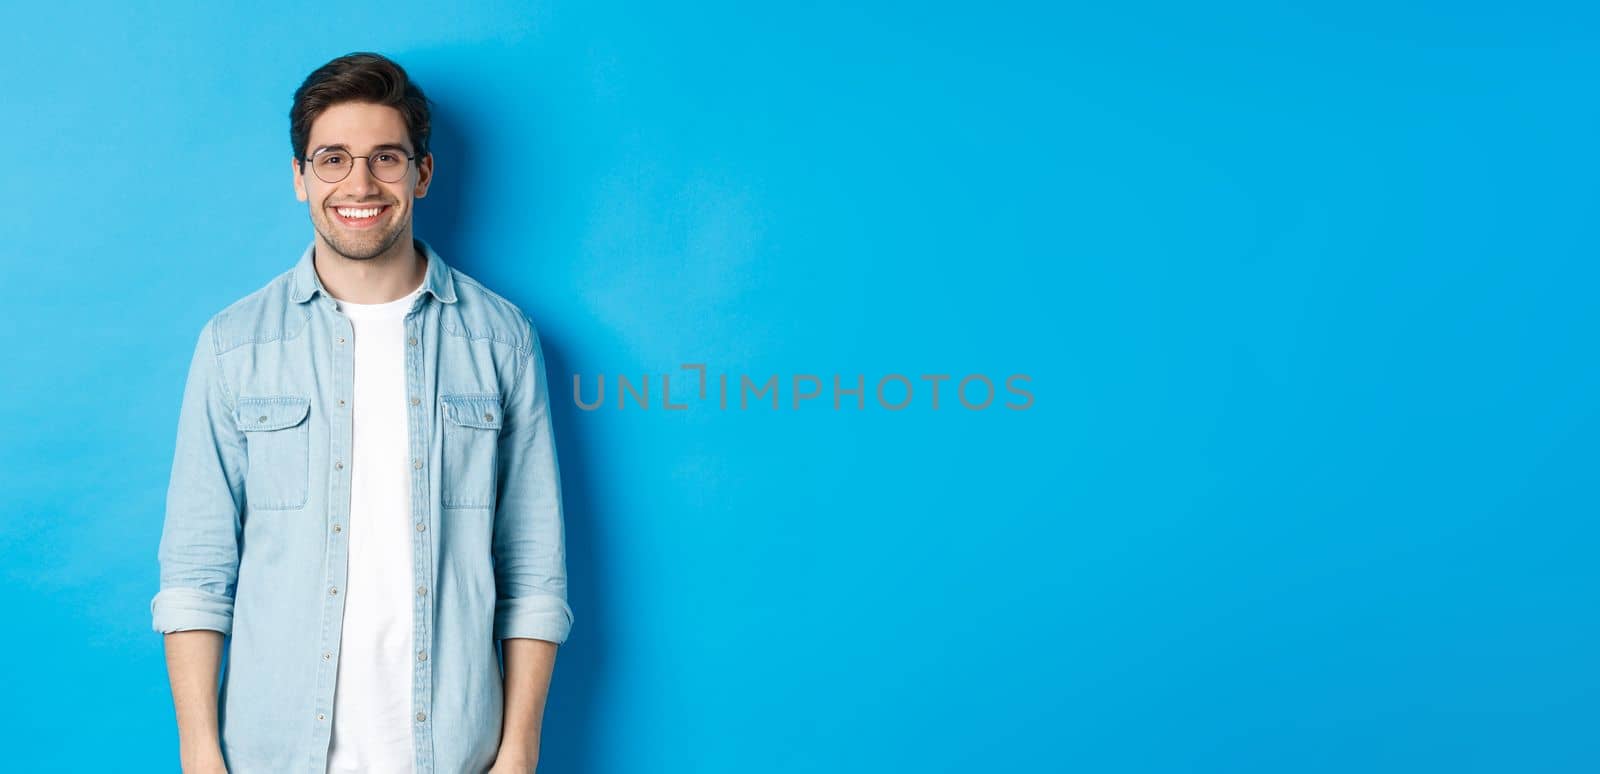 Young modern man in glasses and casual outfit standing against blue background, smiling happy at camera.